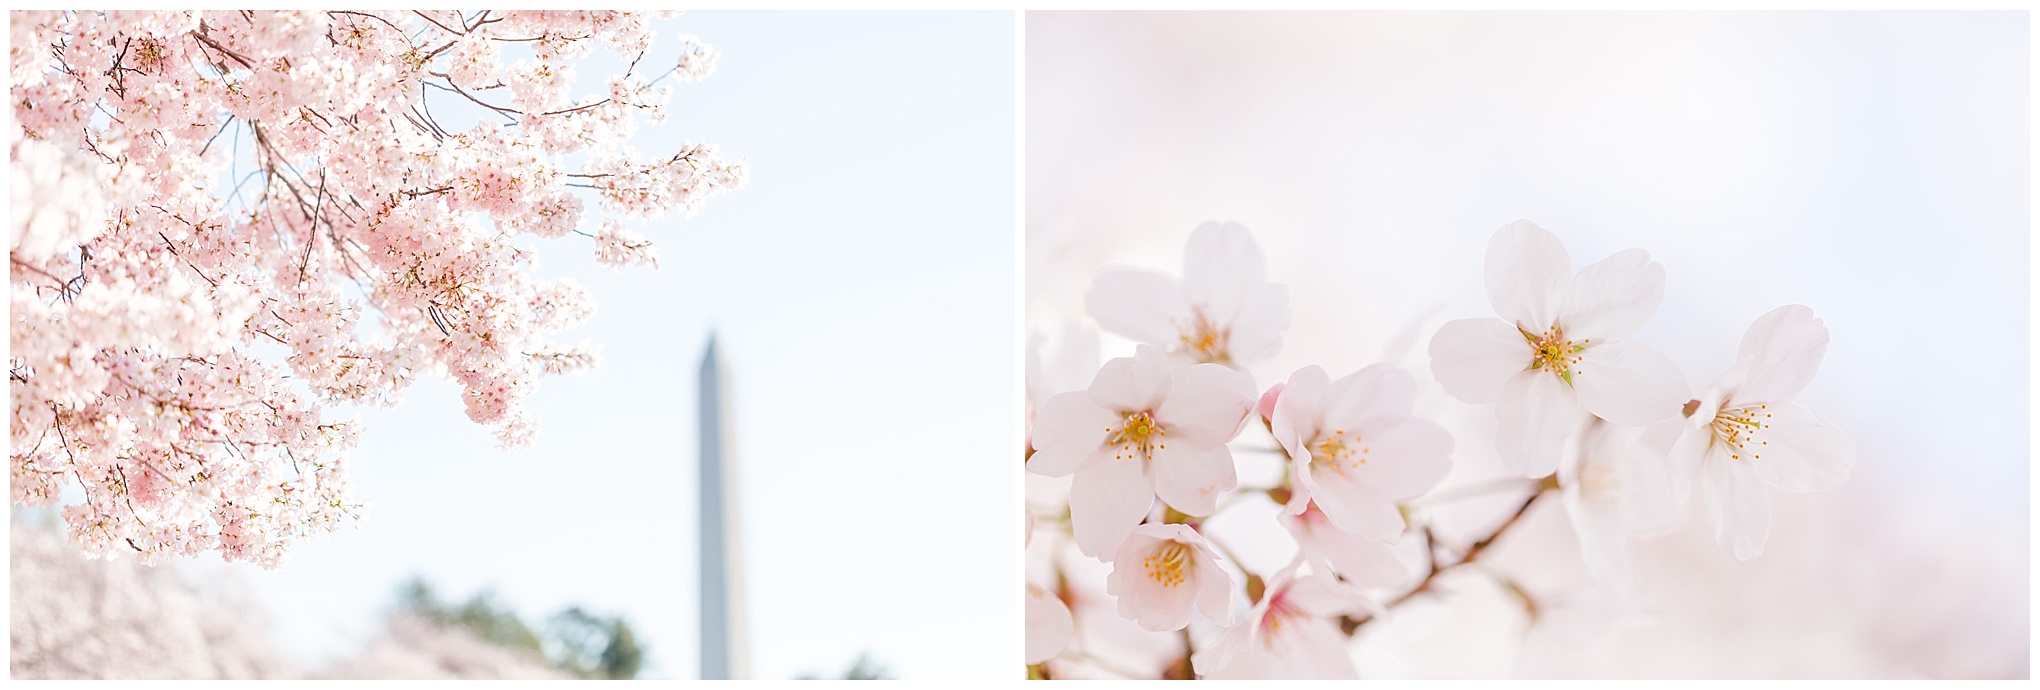 D.C. cherry blossoms, cherry blossoms, pink flowers, pink blooms, spring flowers, cherry blossom season, cherry blossoms photographer, D.C. cherry blossoms photographer, values based business, Washington Monument